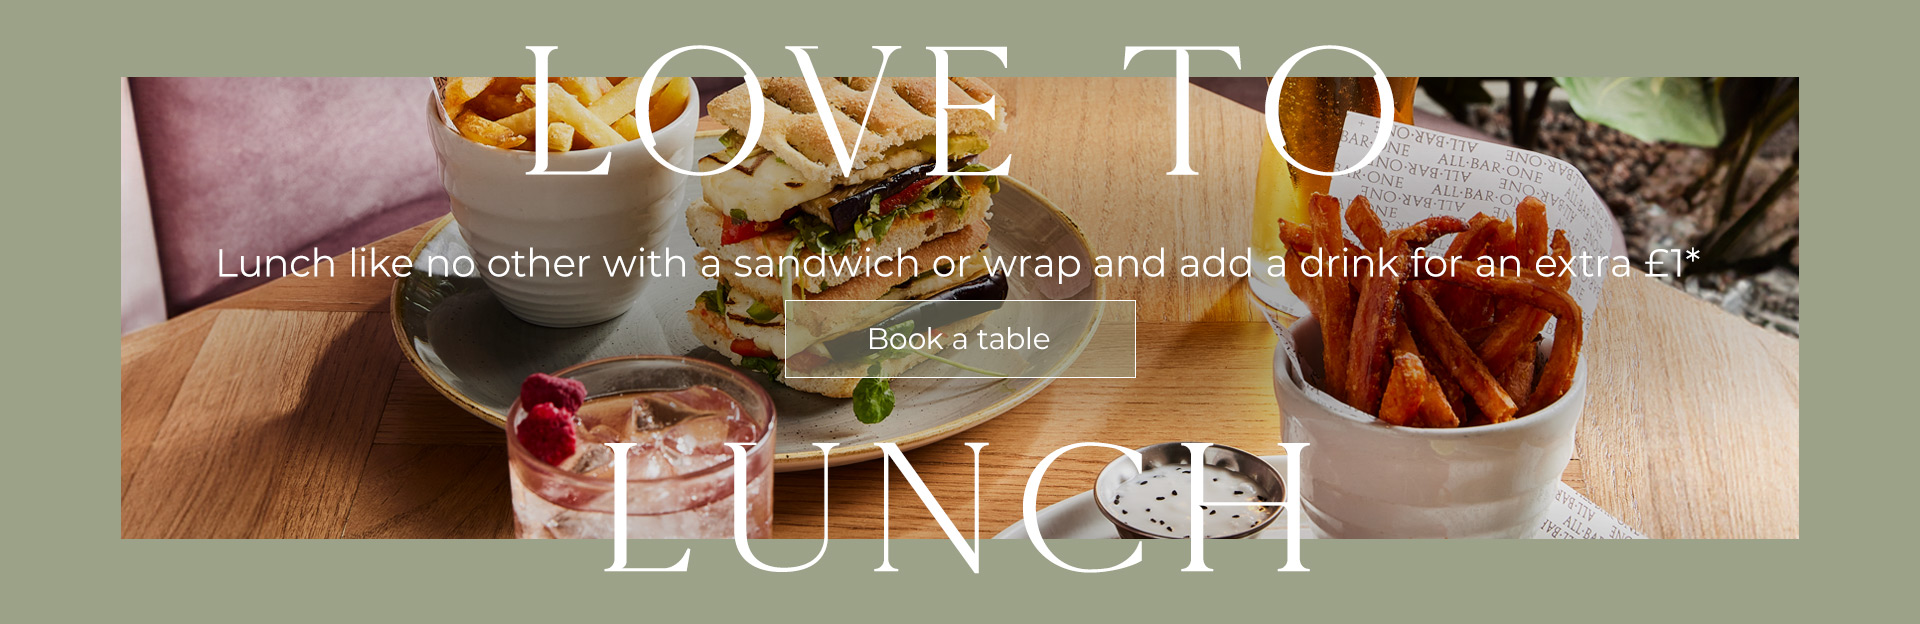 Lunch Offer at All Bar One Portsmouth